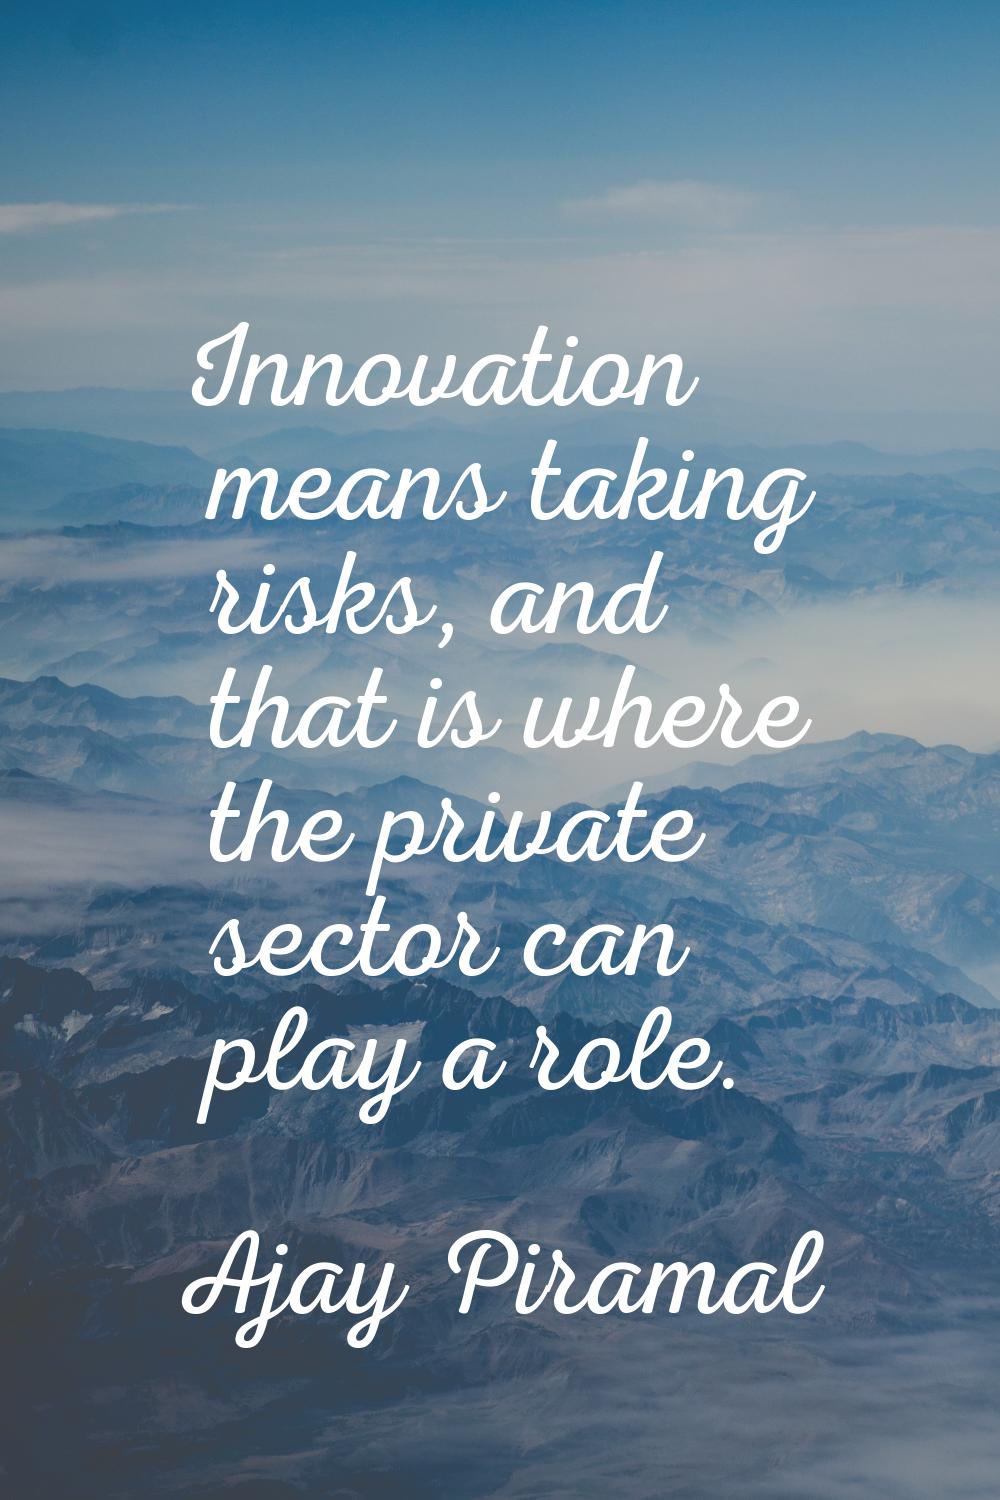 Innovation means taking risks, and that is where the private sector can play a role.